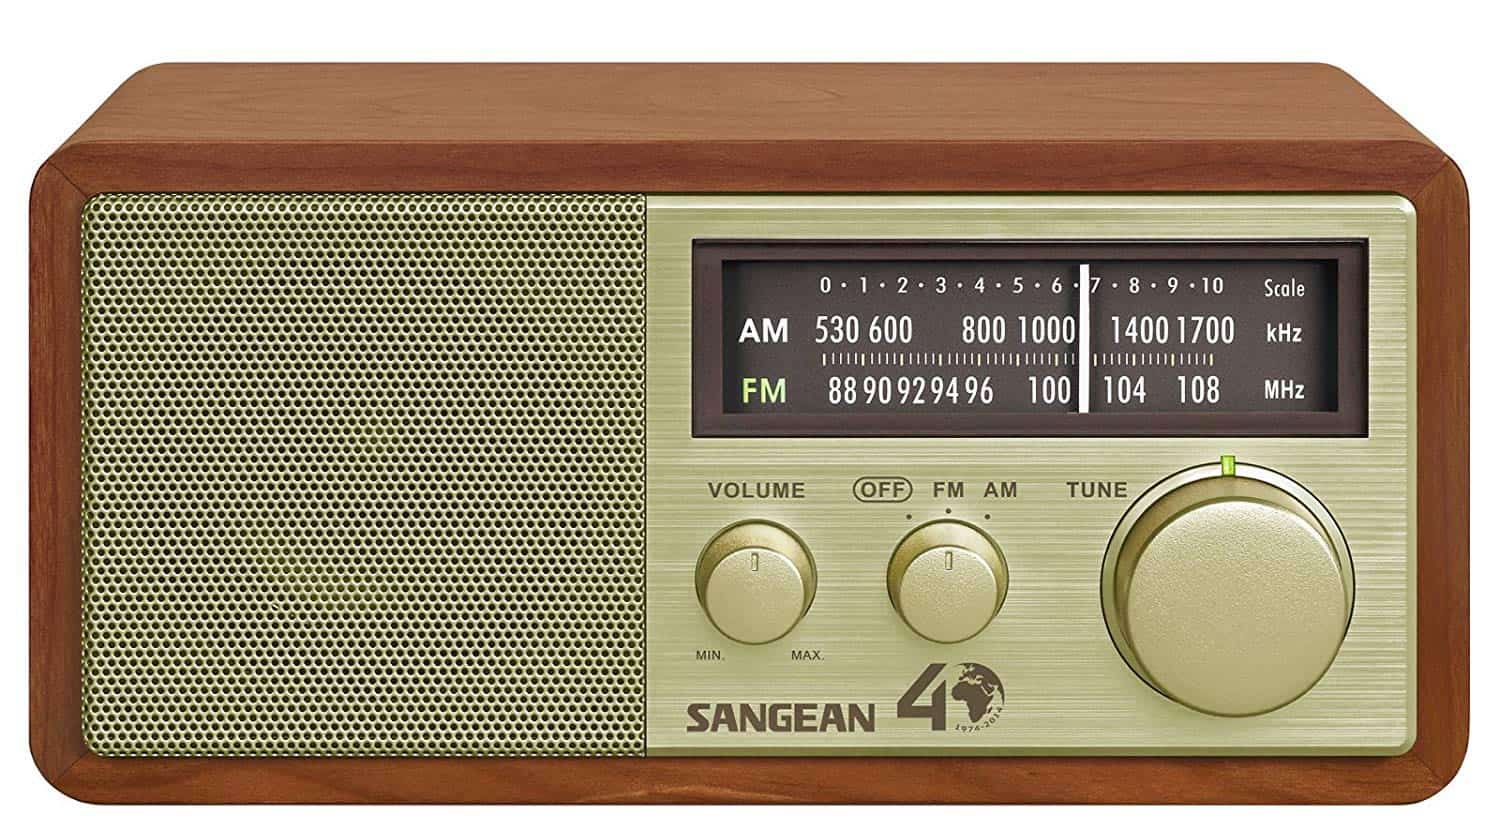 Sangean WR-11SE Tabletop Radio ReviewIdeal for any room in your home, the Sangean WR-11SE Tabletop Radio provides beautiful sound and state-of-the-art performance with a vintage feel.